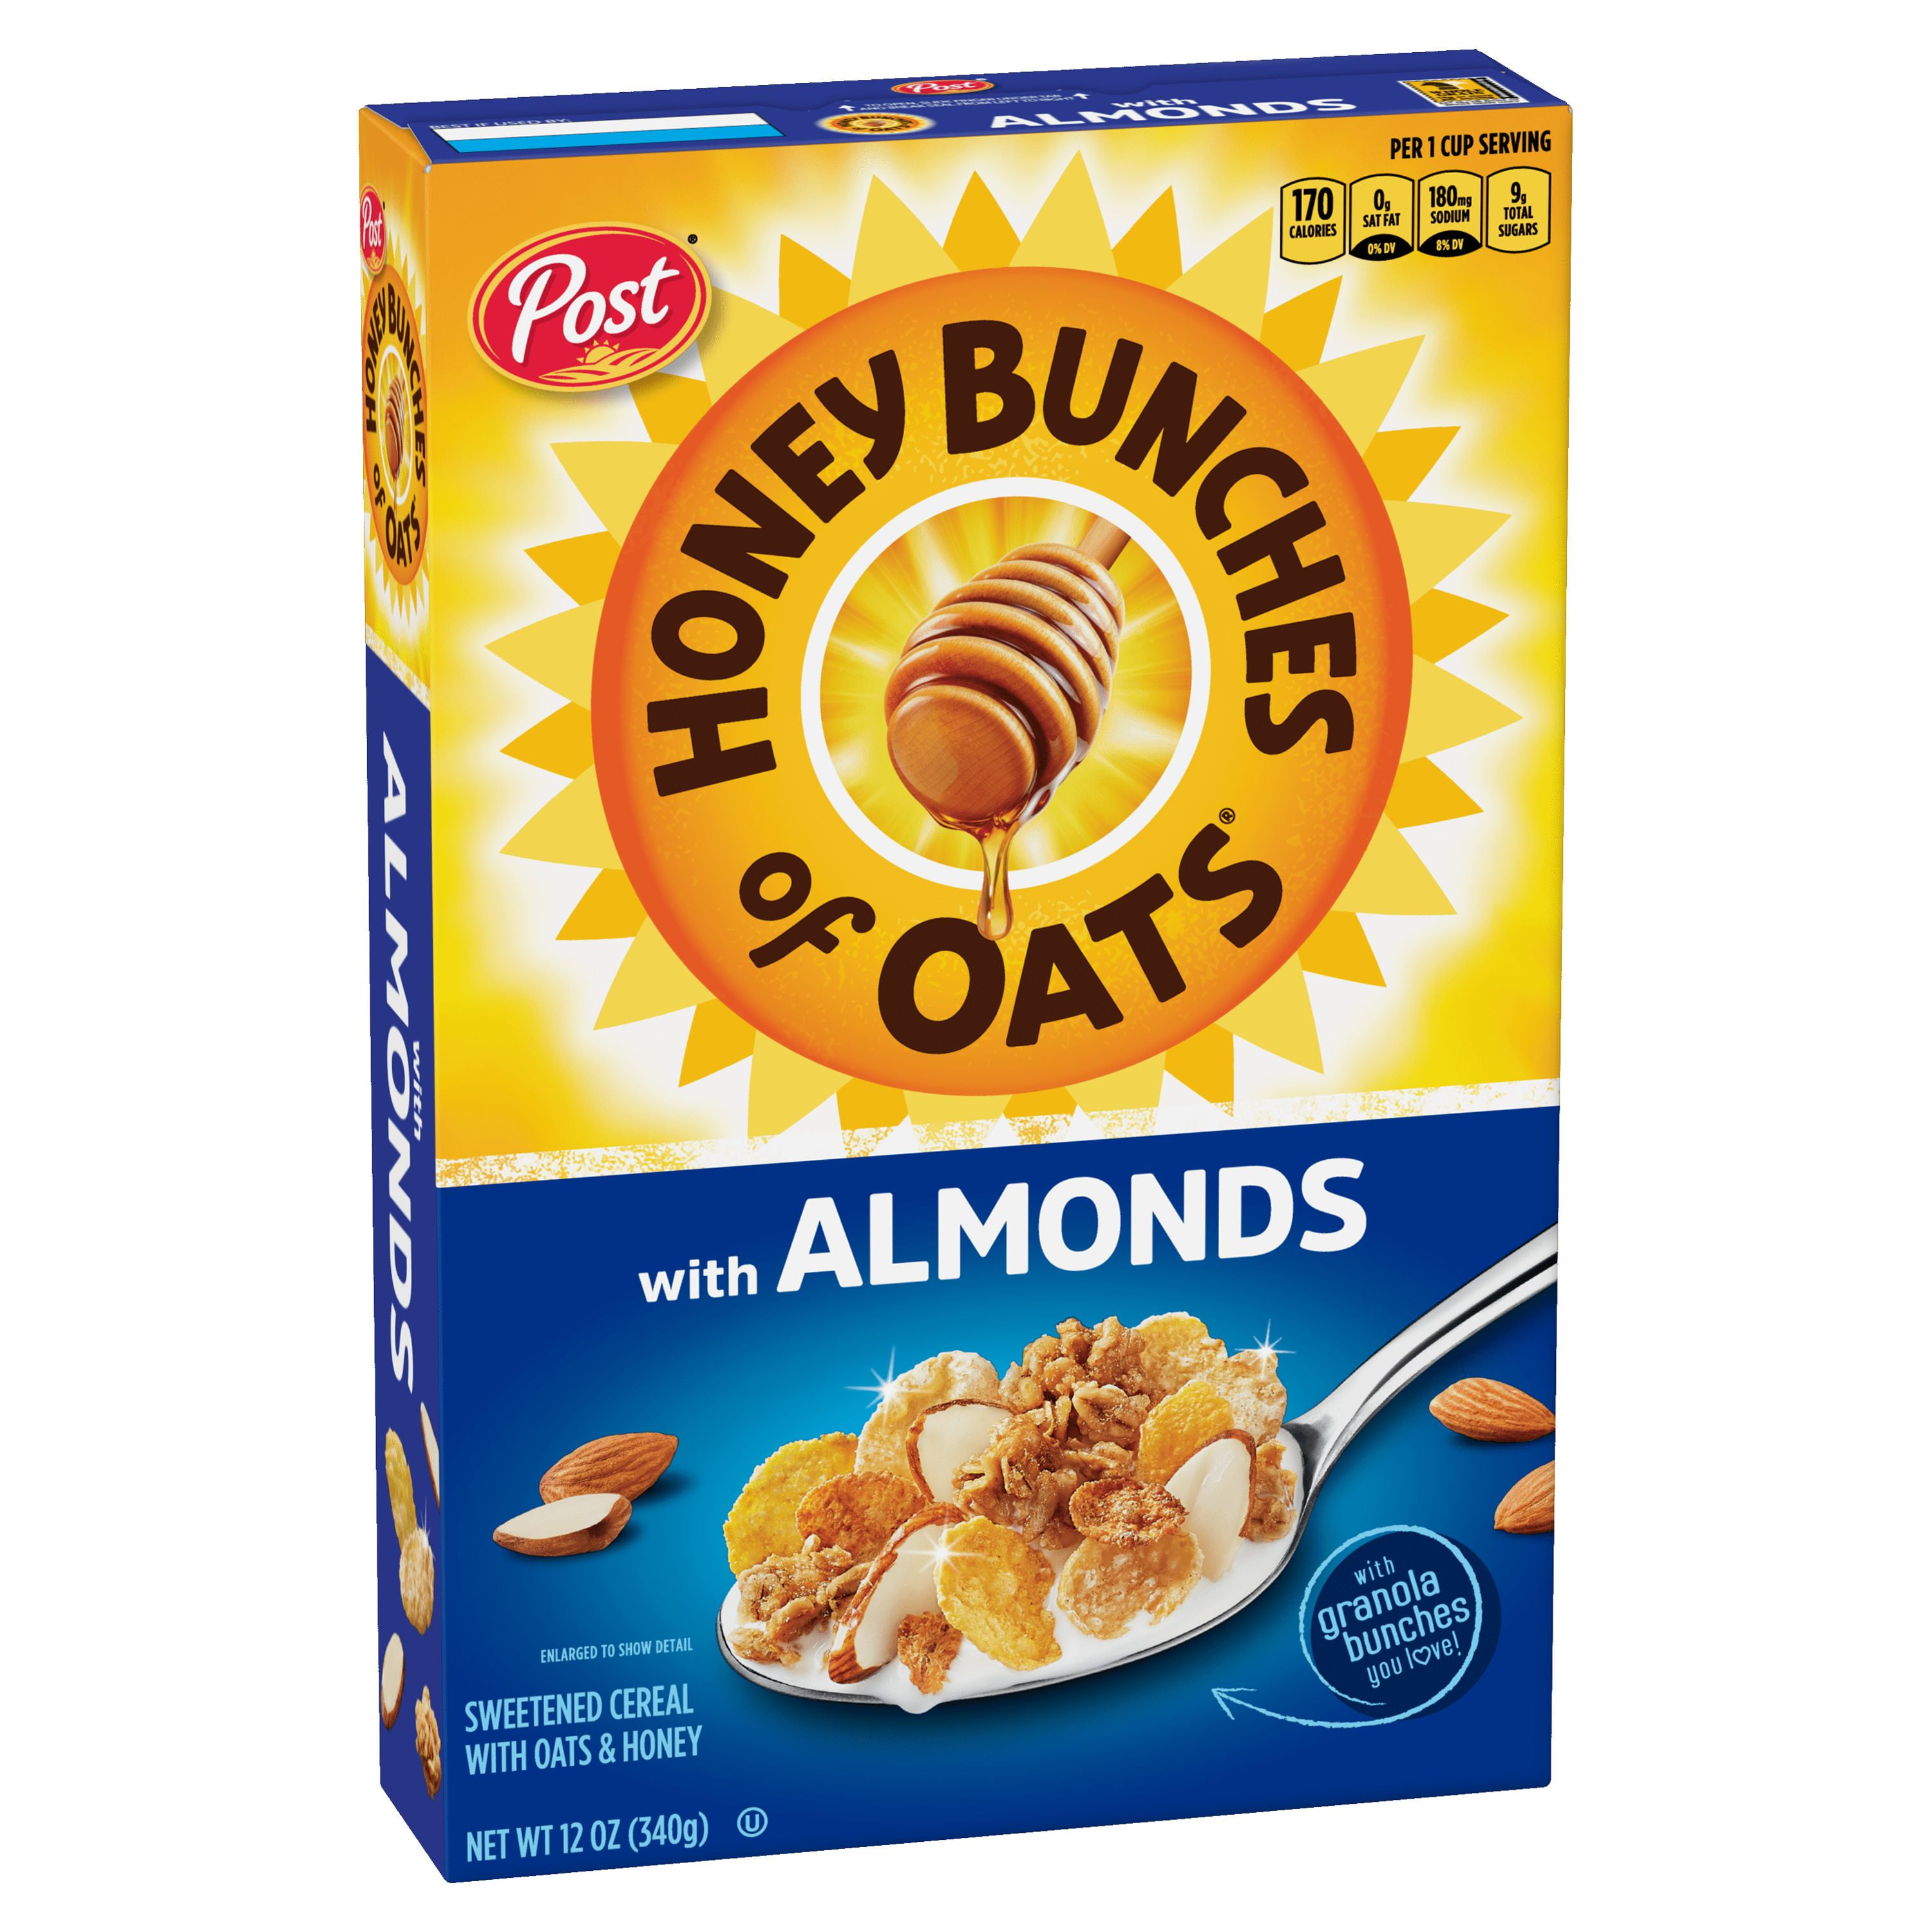 Post Honey Bunches of Oats with Almonds Breakfast Cereal, 12 OZ Box